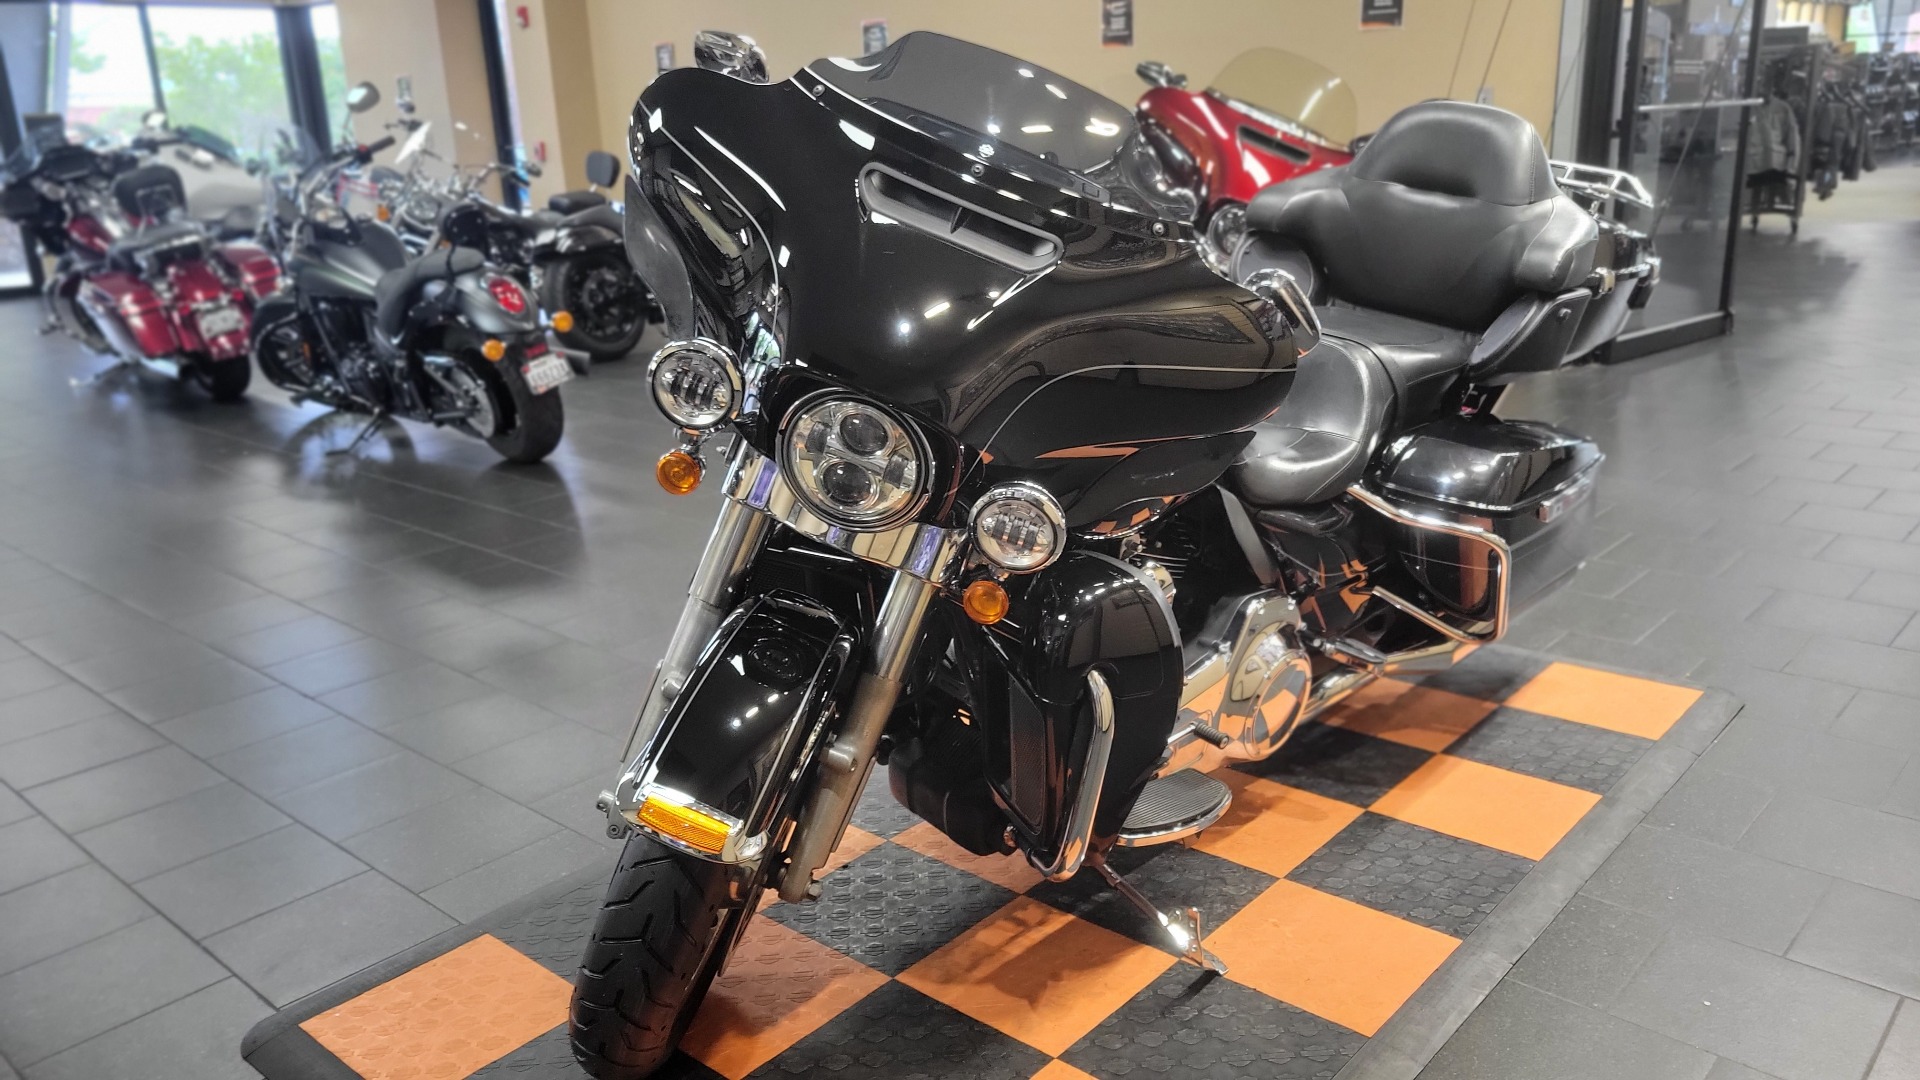 2015 Harley-Davidson Ultra Limited Low in The Woodlands, Texas - Photo 3